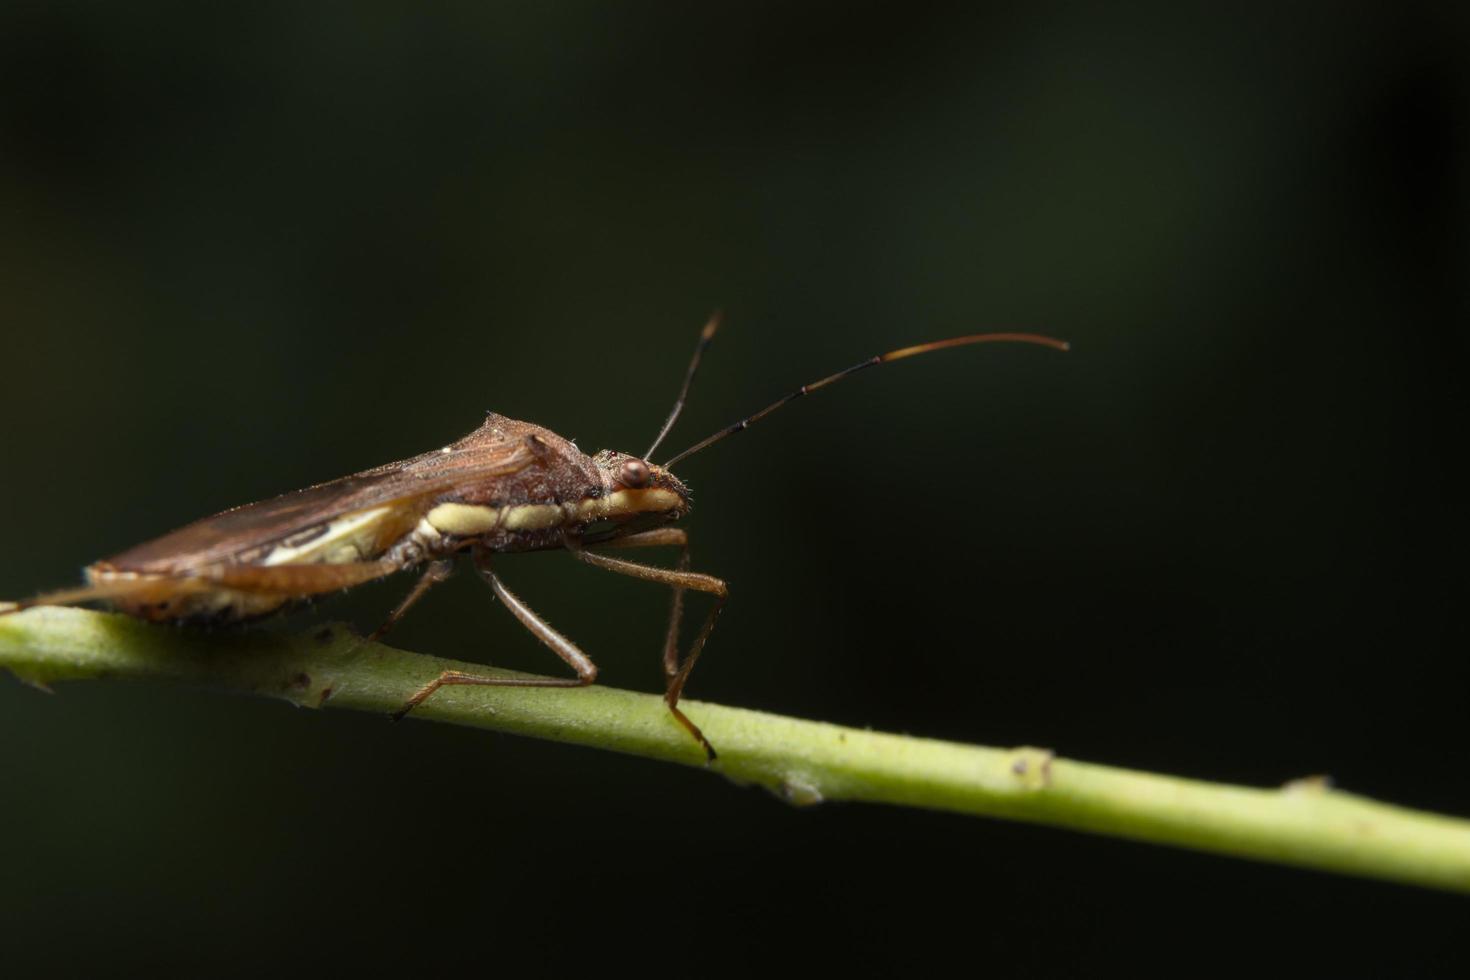 Brown assassin bug on a plant photo